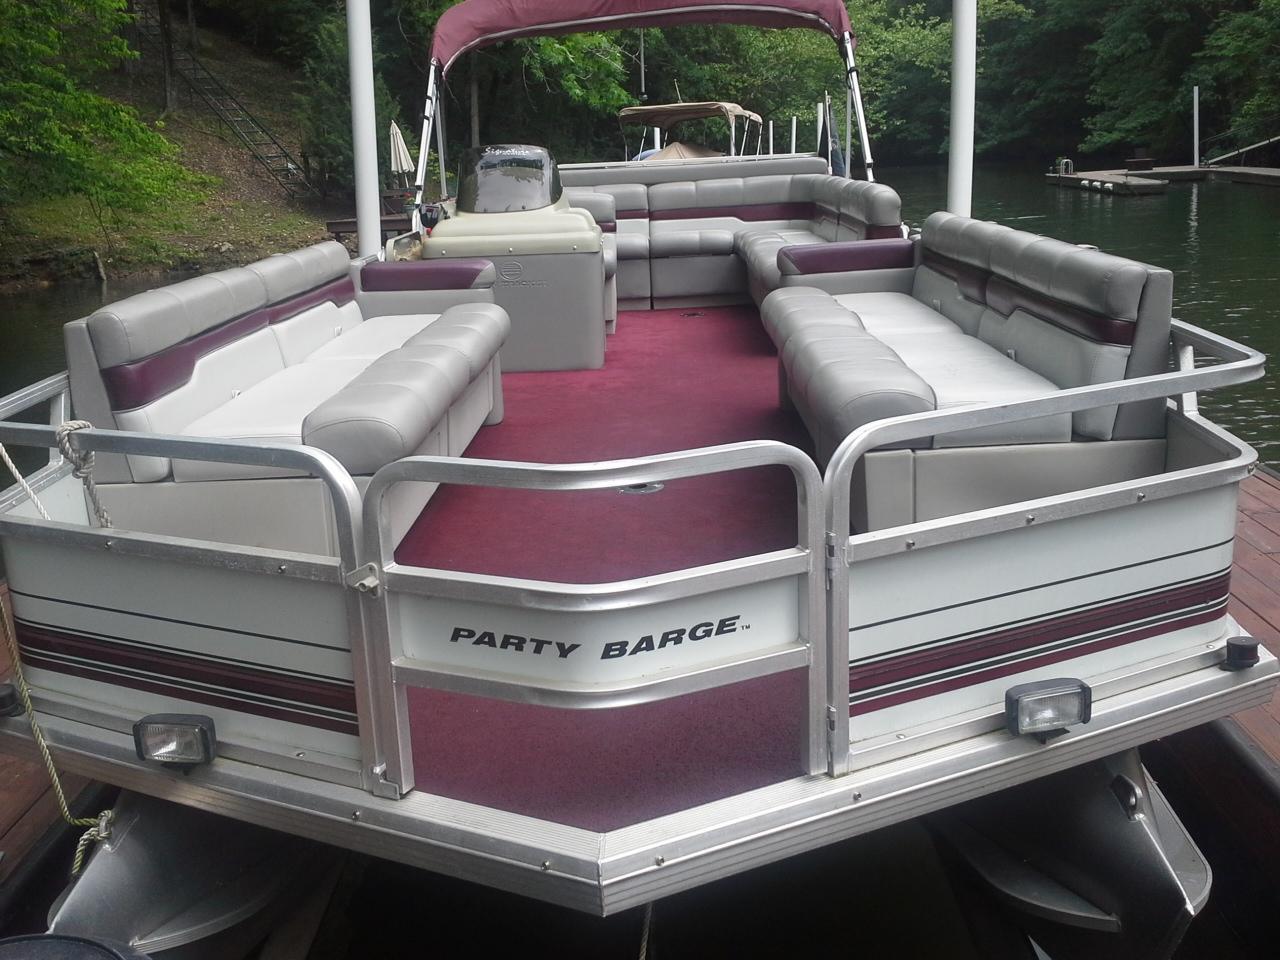 SUNTRACKER Party barge, Pickwick